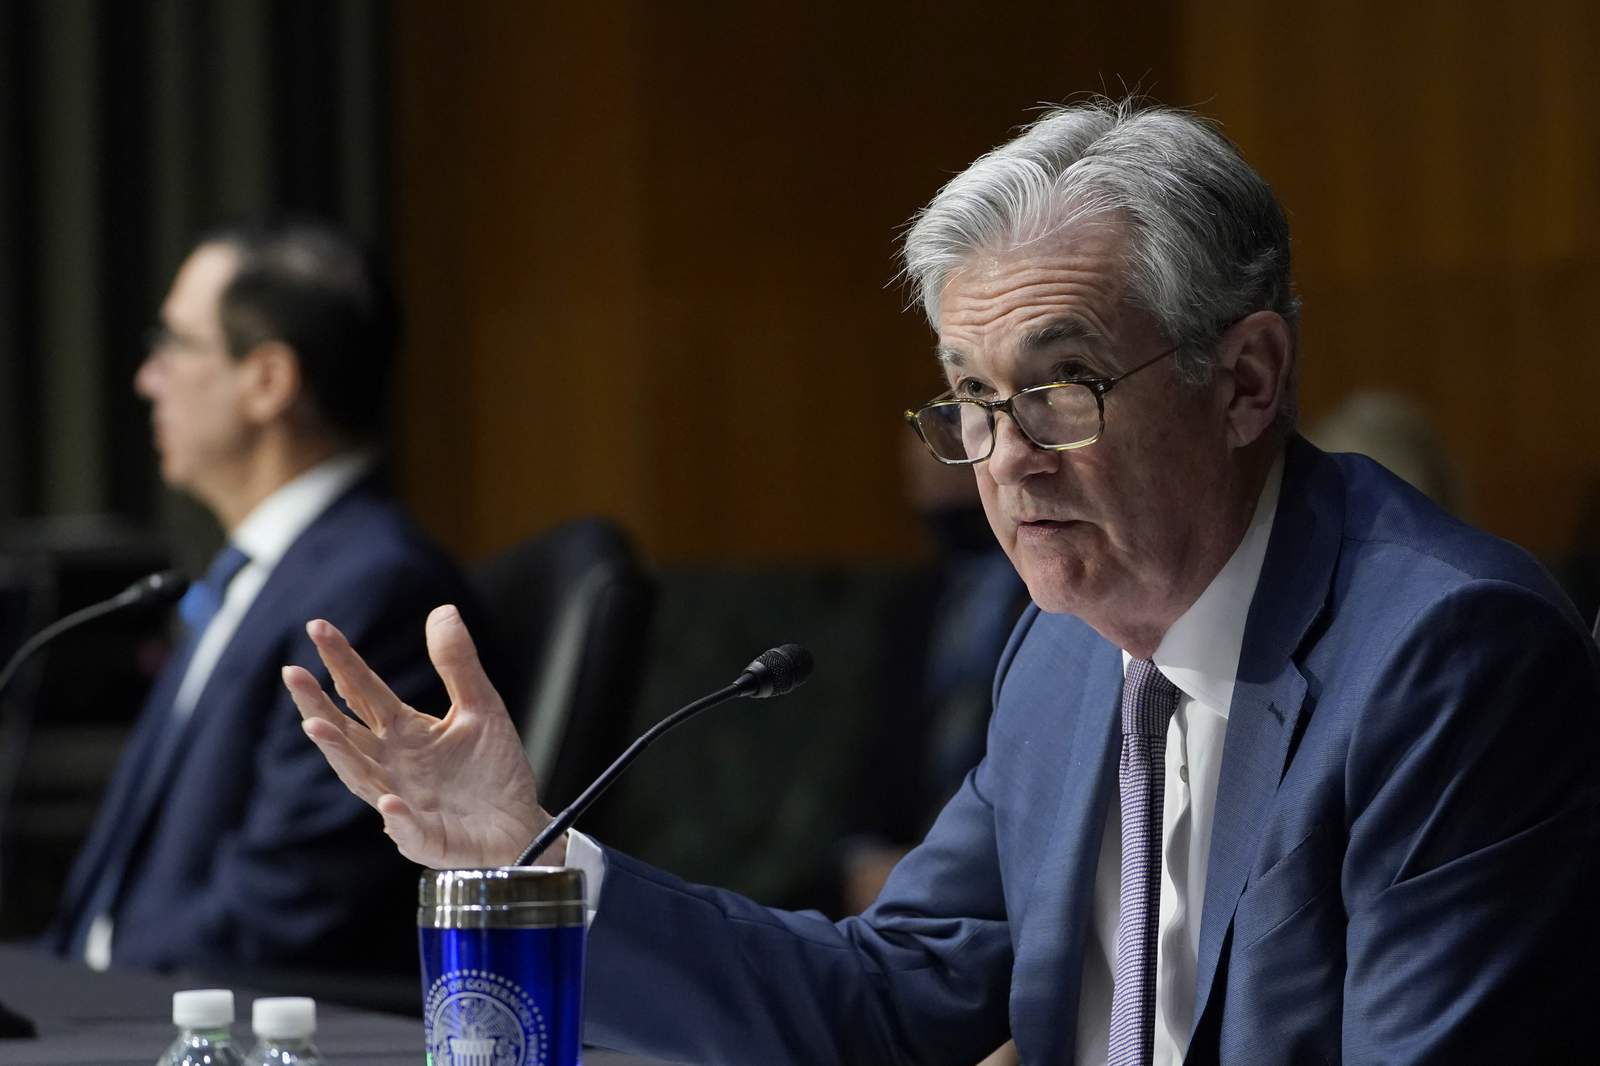 The Fed will change monetary policy only gradually and transparently